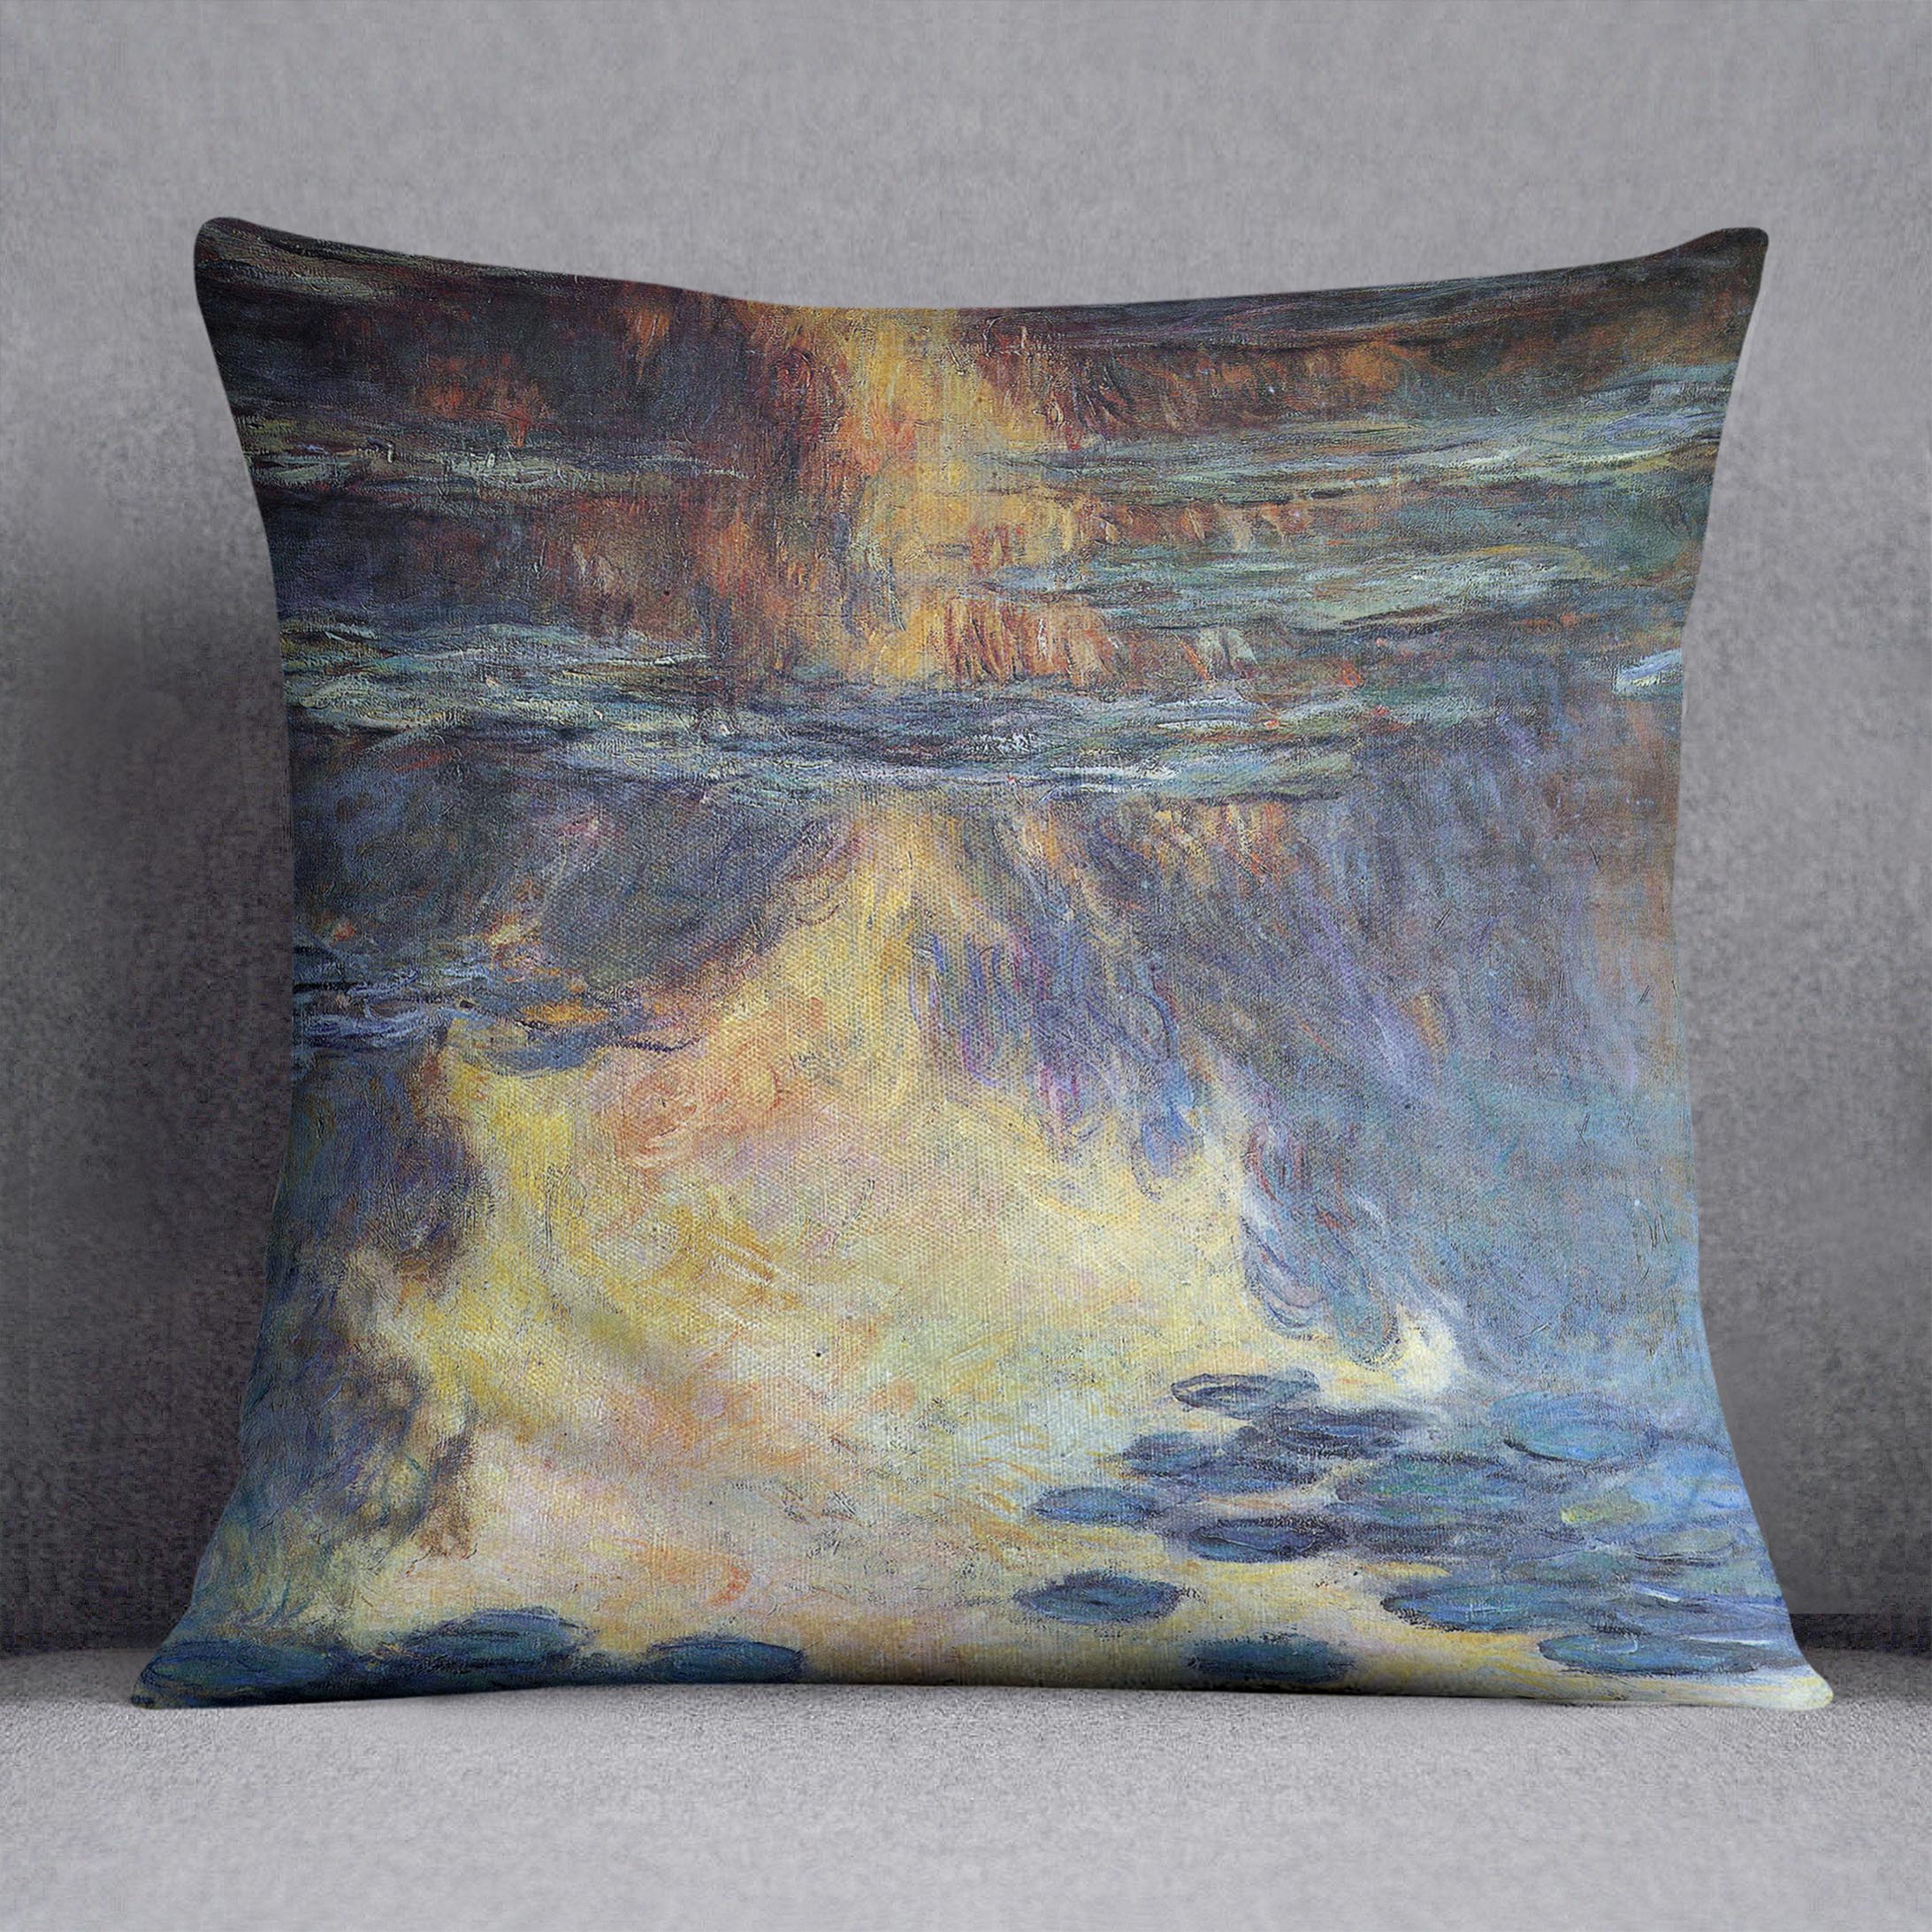 Water lilies water landscape 2 by Monet Cushion